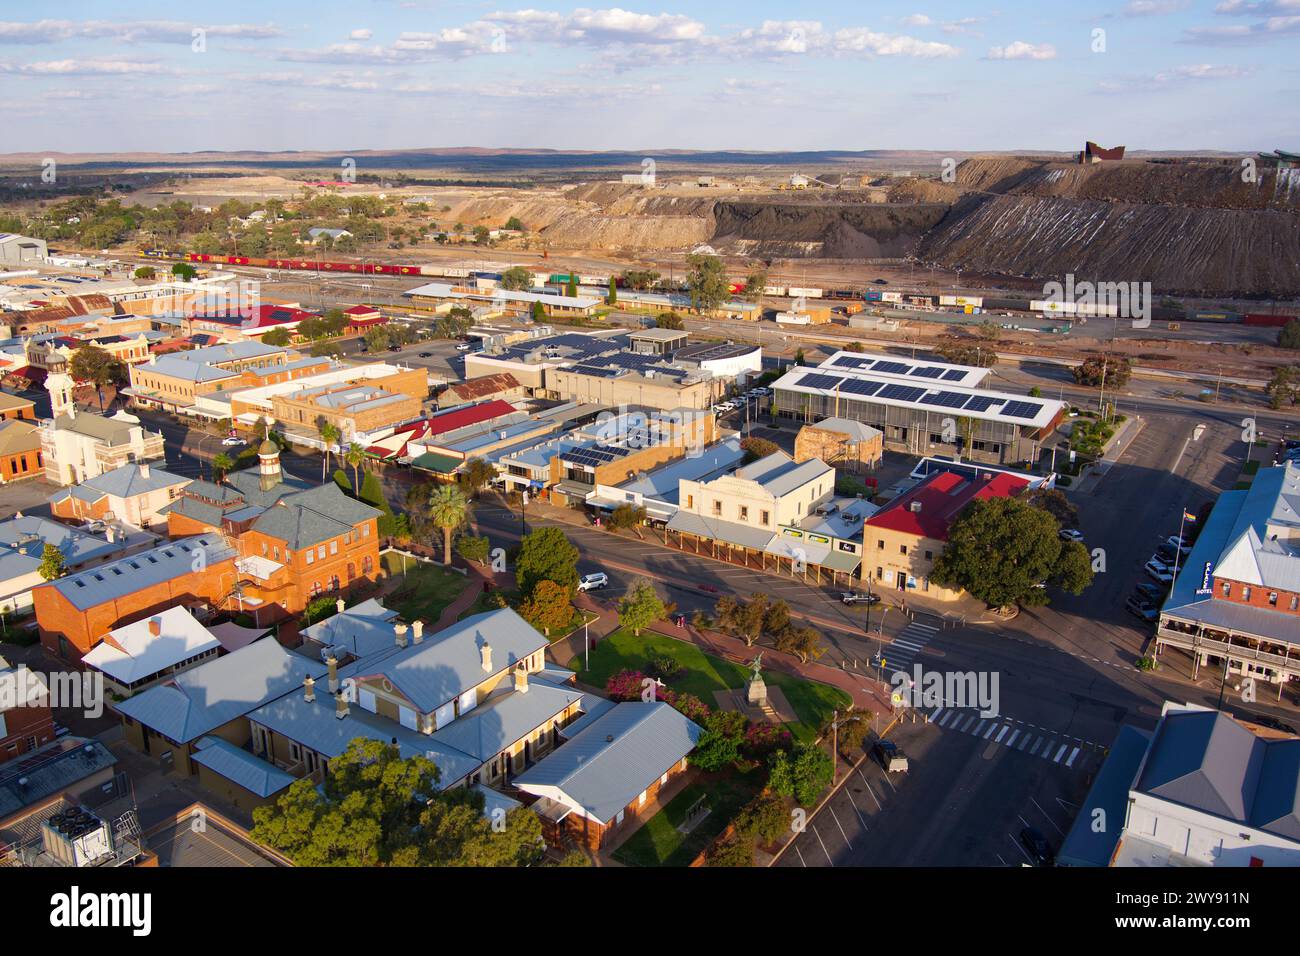 Aerial of Argent Street in the CBD of Broken Hill New South Wales Australia Stock Photo